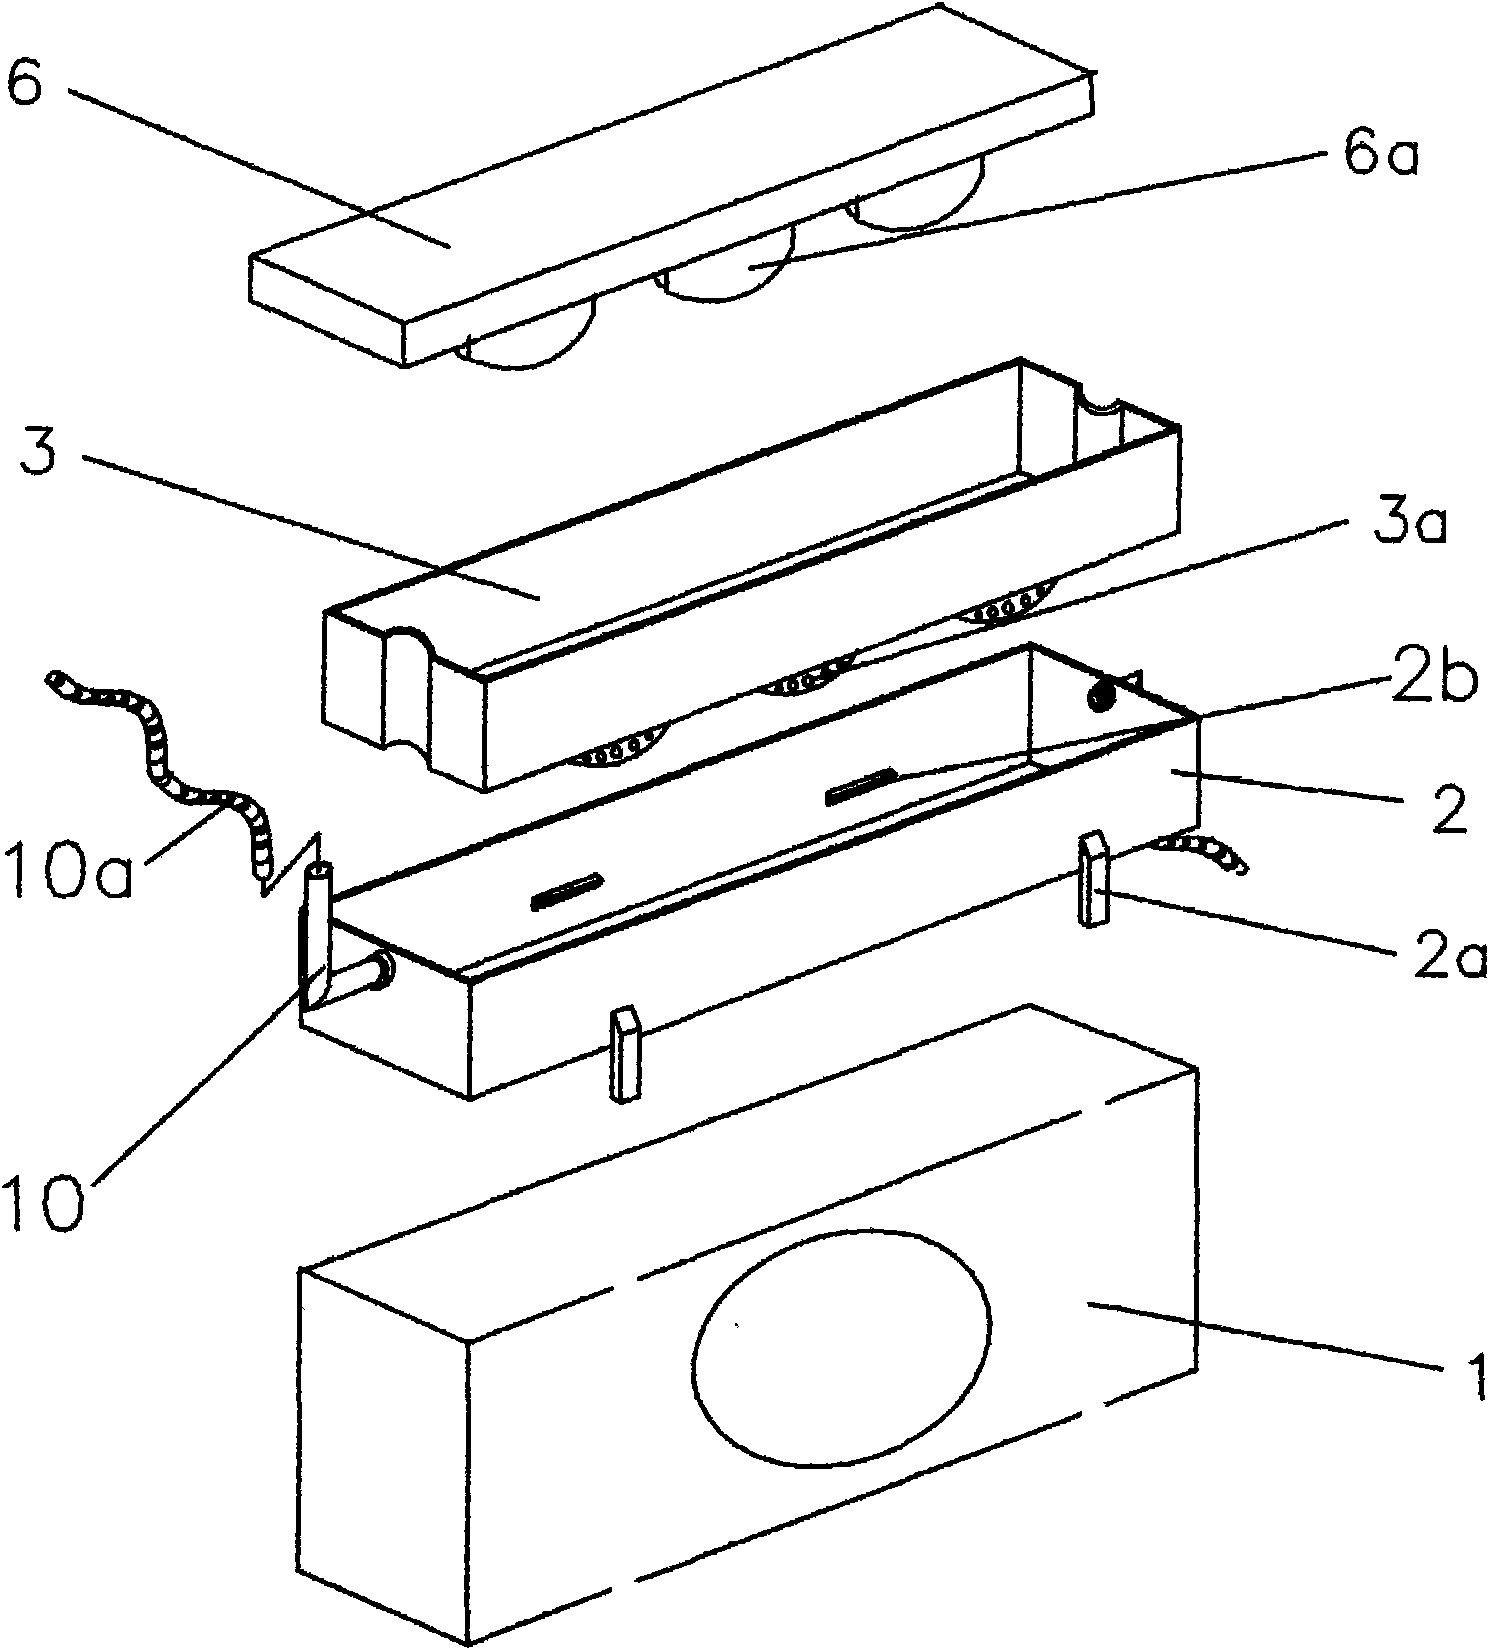 Air conditioner greening and cooling device utilizing condensed water